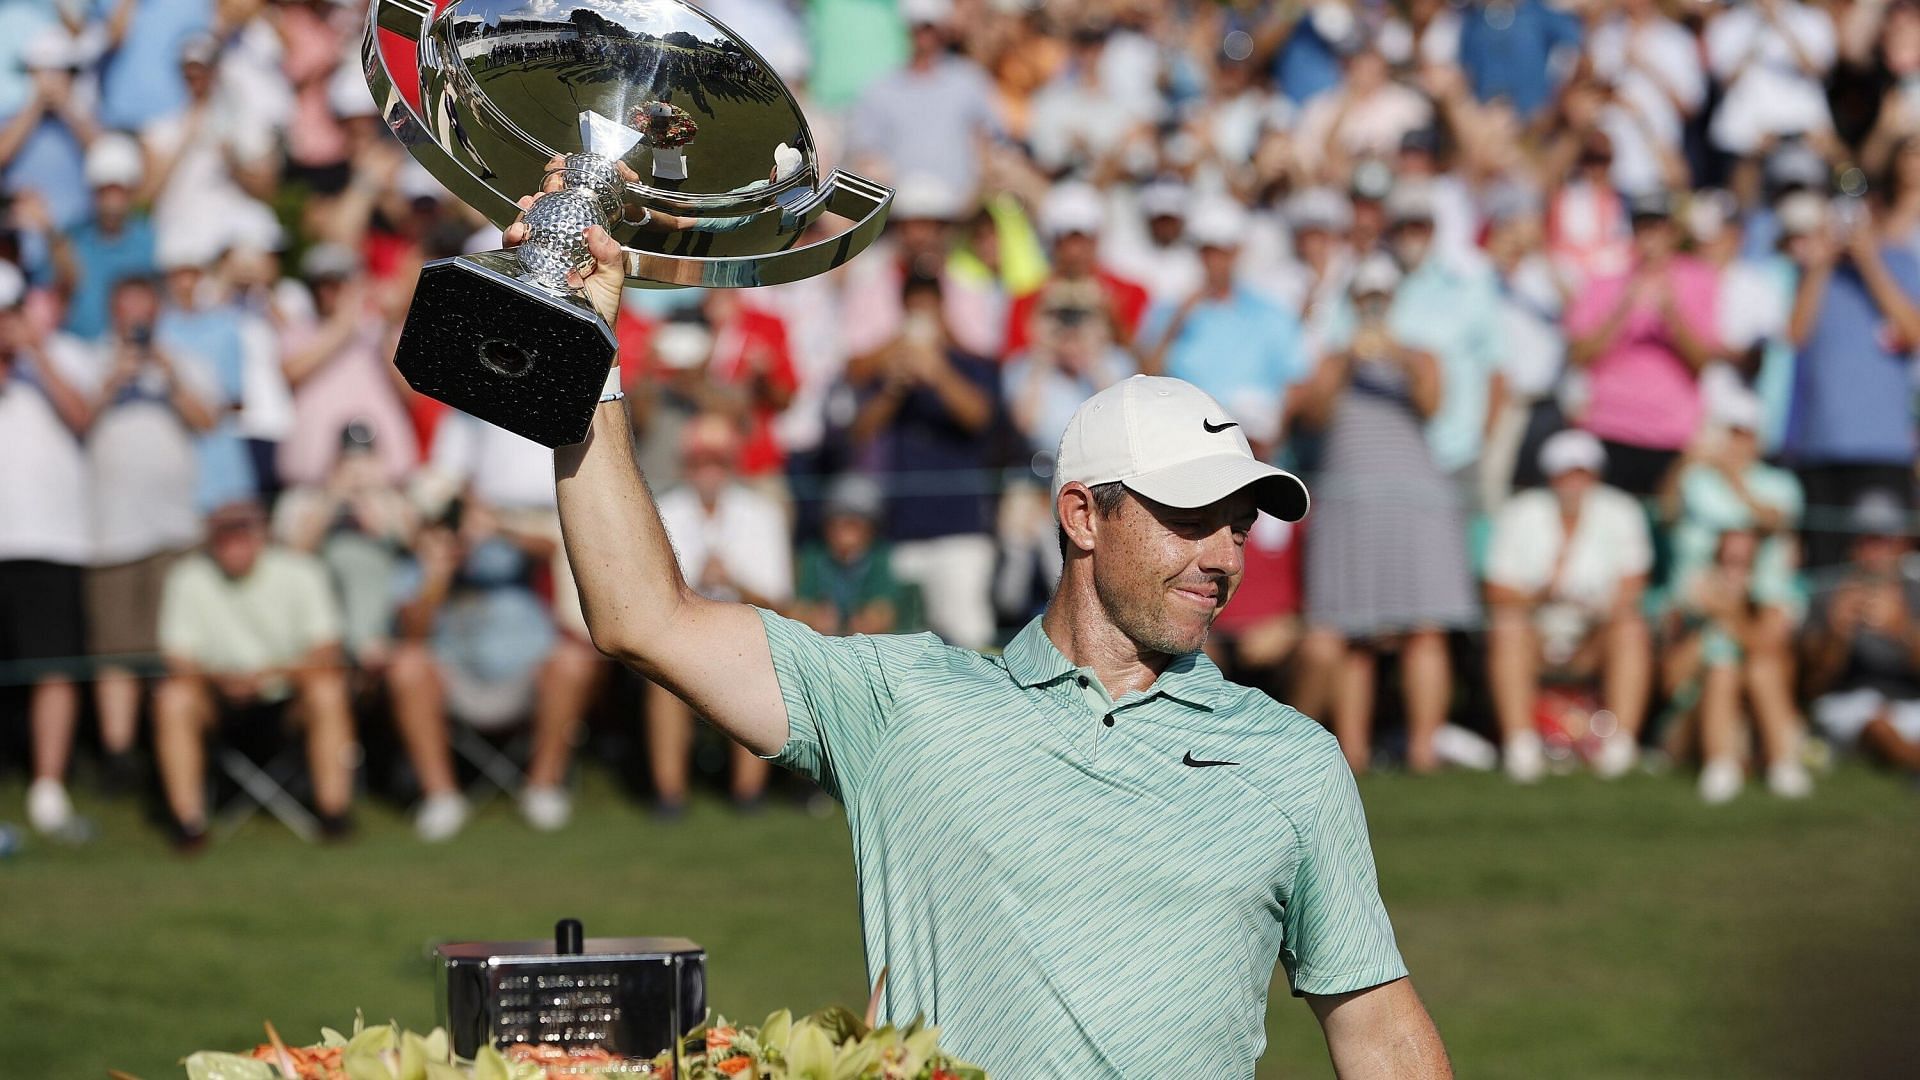 &ldquo;I haven&rsquo;t really had a chance&rdquo; &ndash; Rory McIlroy on not being able to celebrate his wins